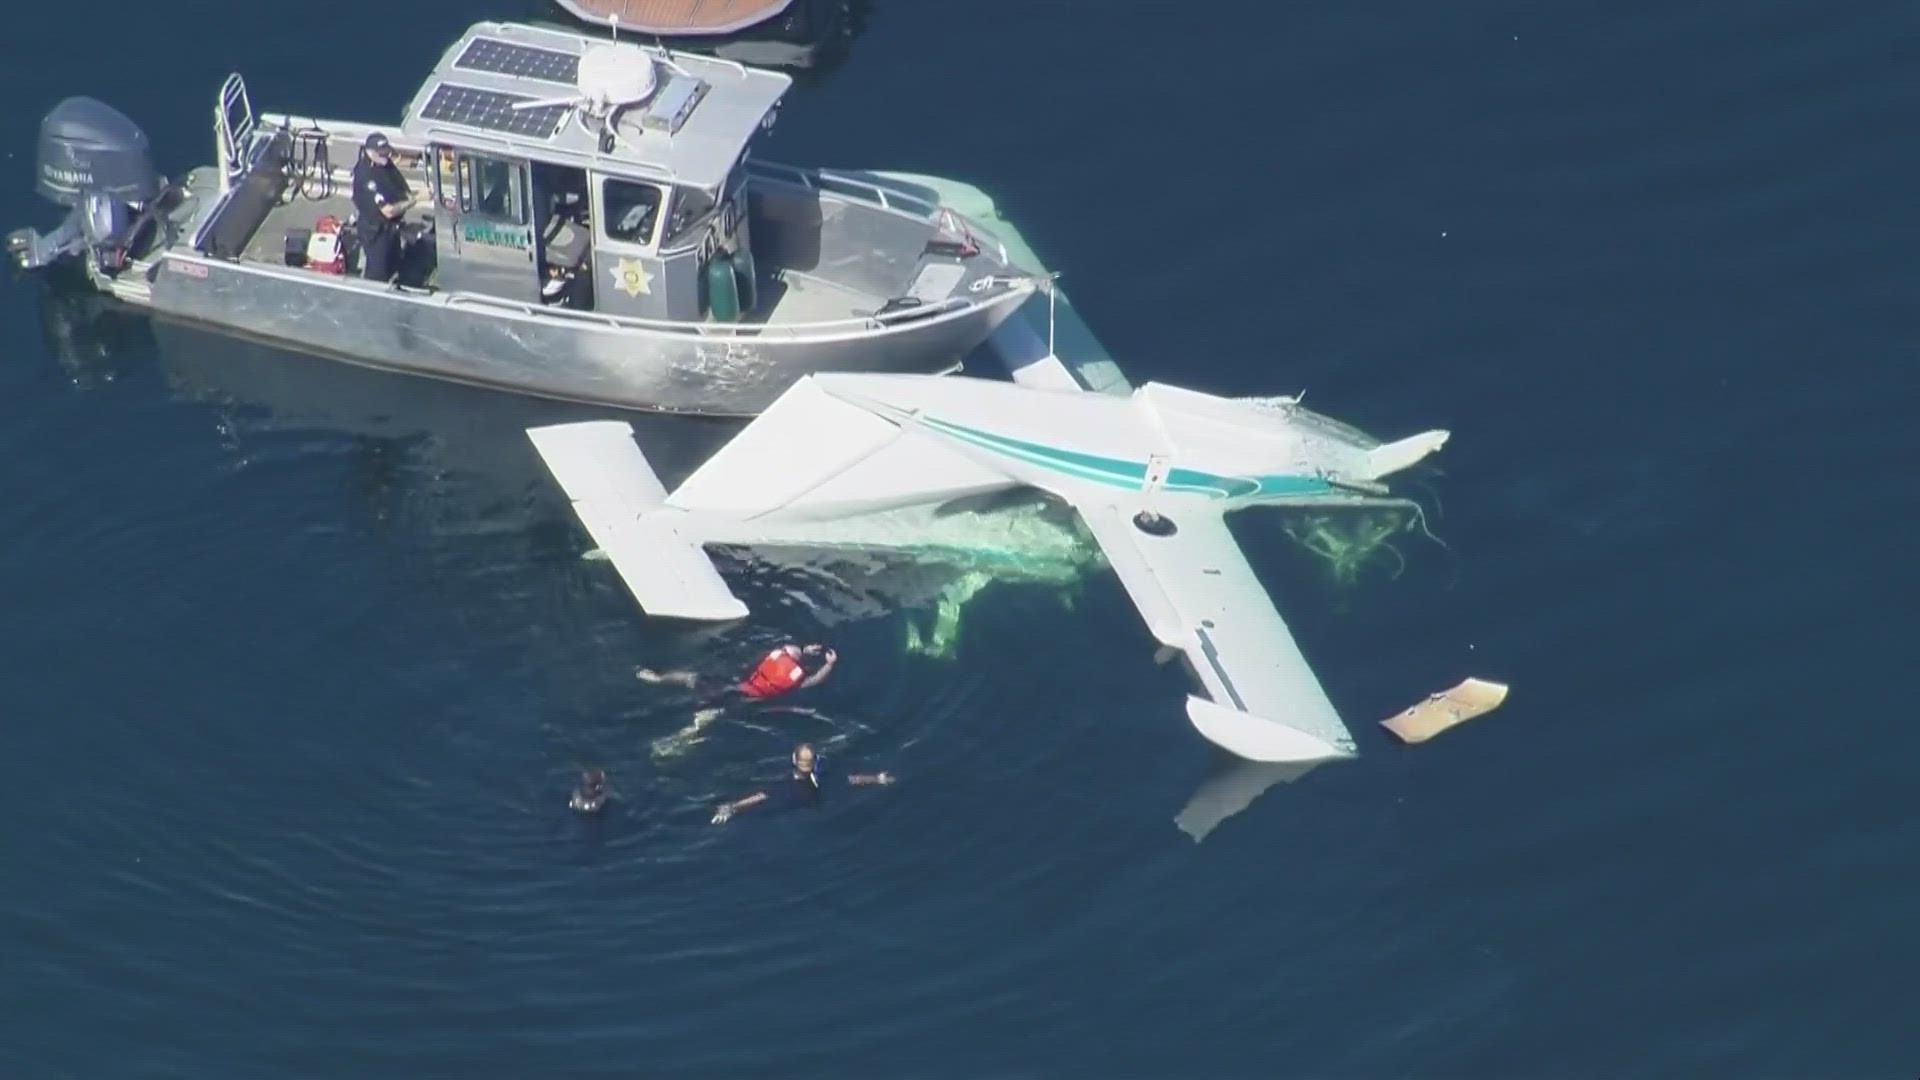 One person was killed and one person was taken to the hospital in a plane crash in Lake Sammamish on Sept. 15.